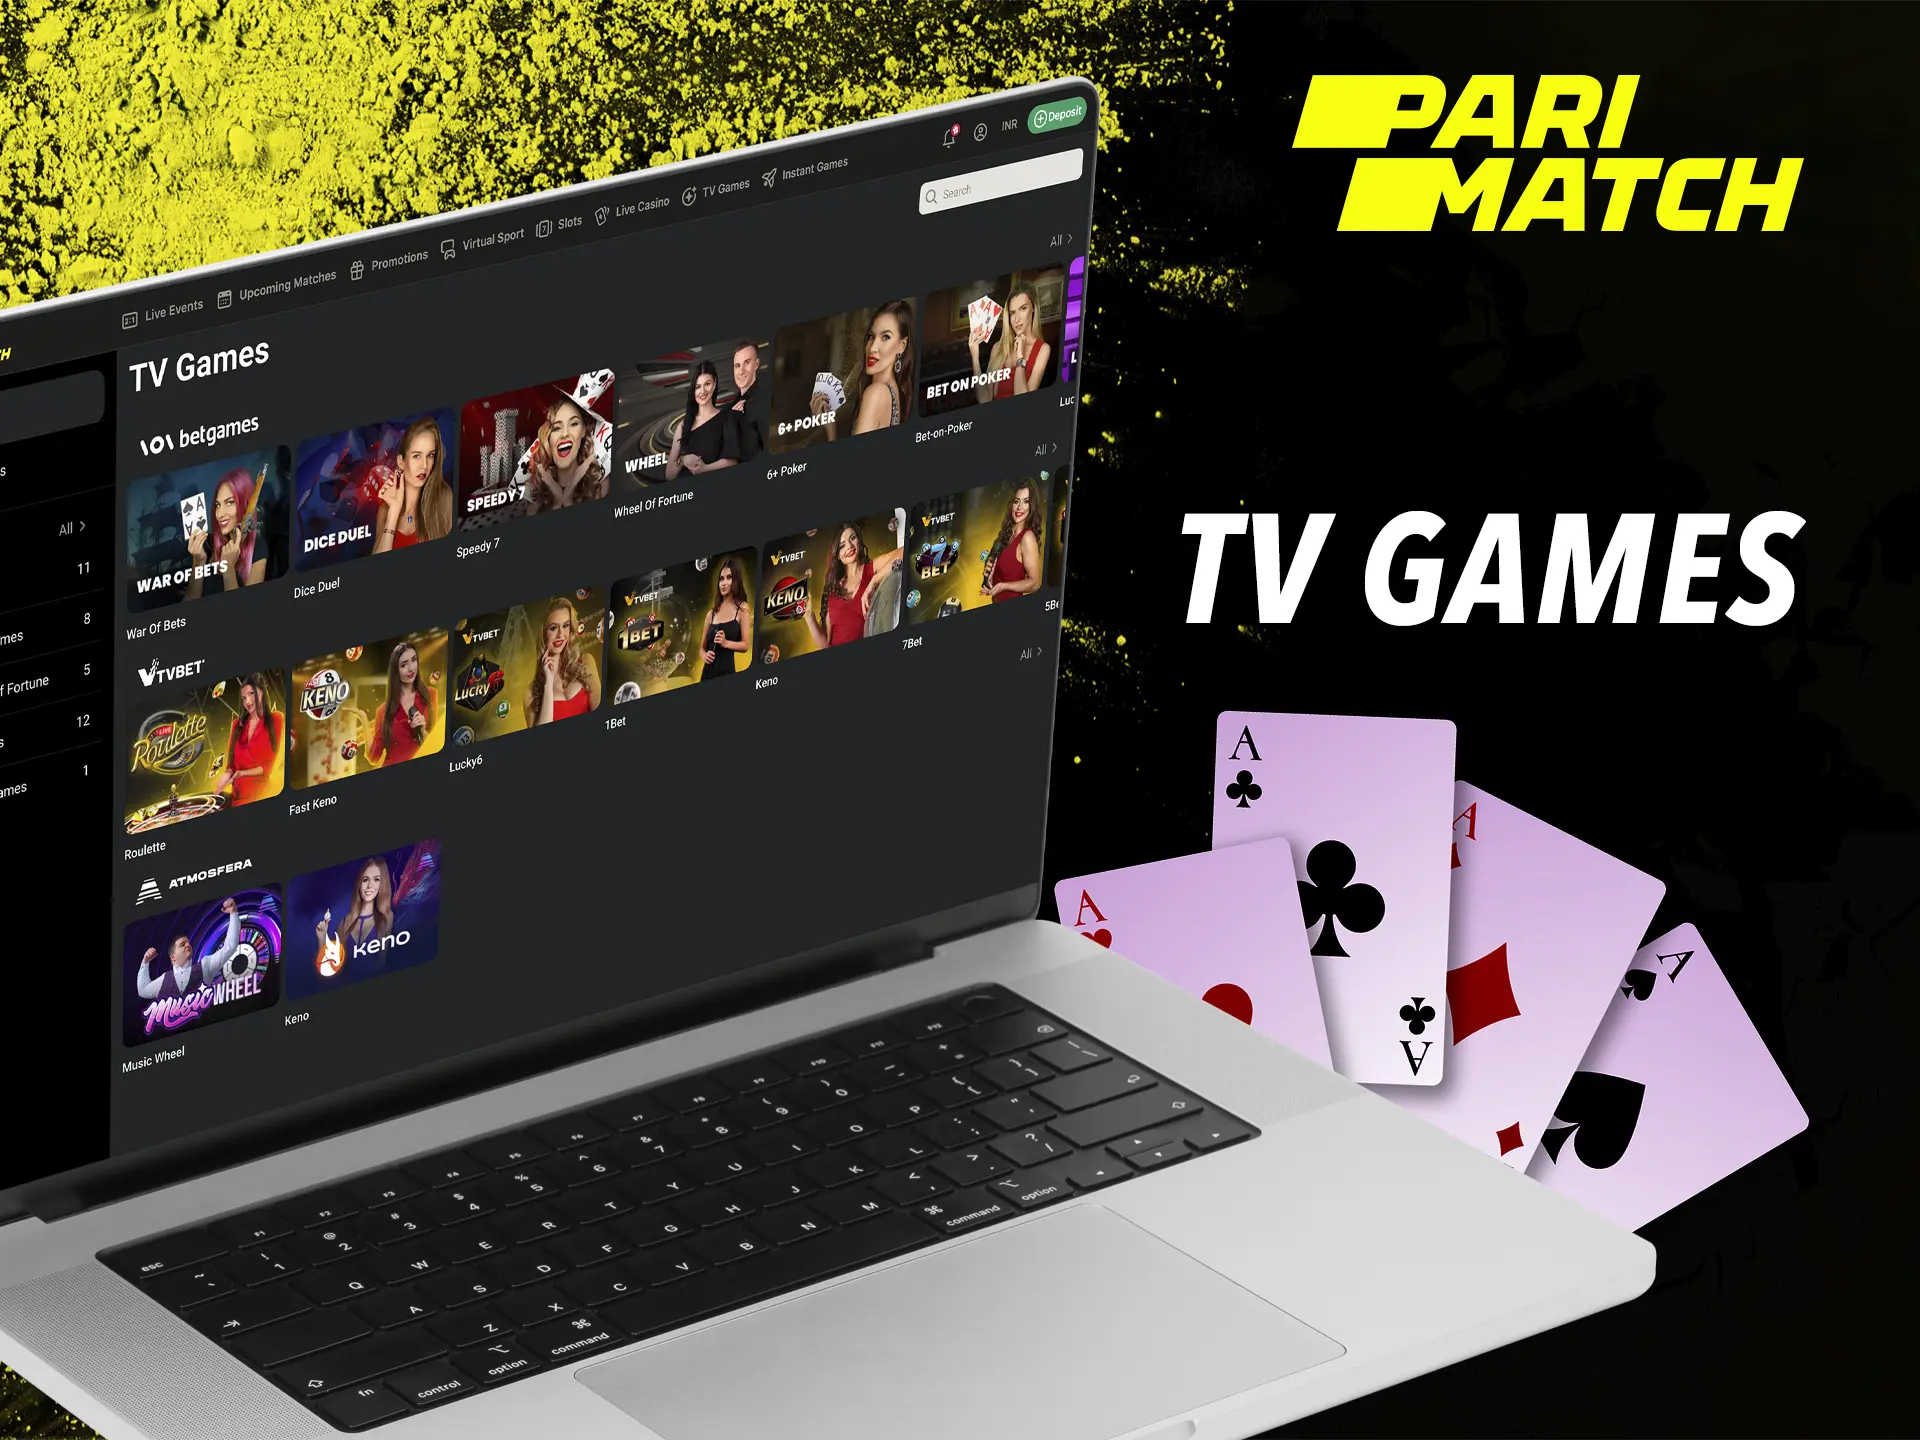 Learn the detailed rules when using TV games from Parimatch.